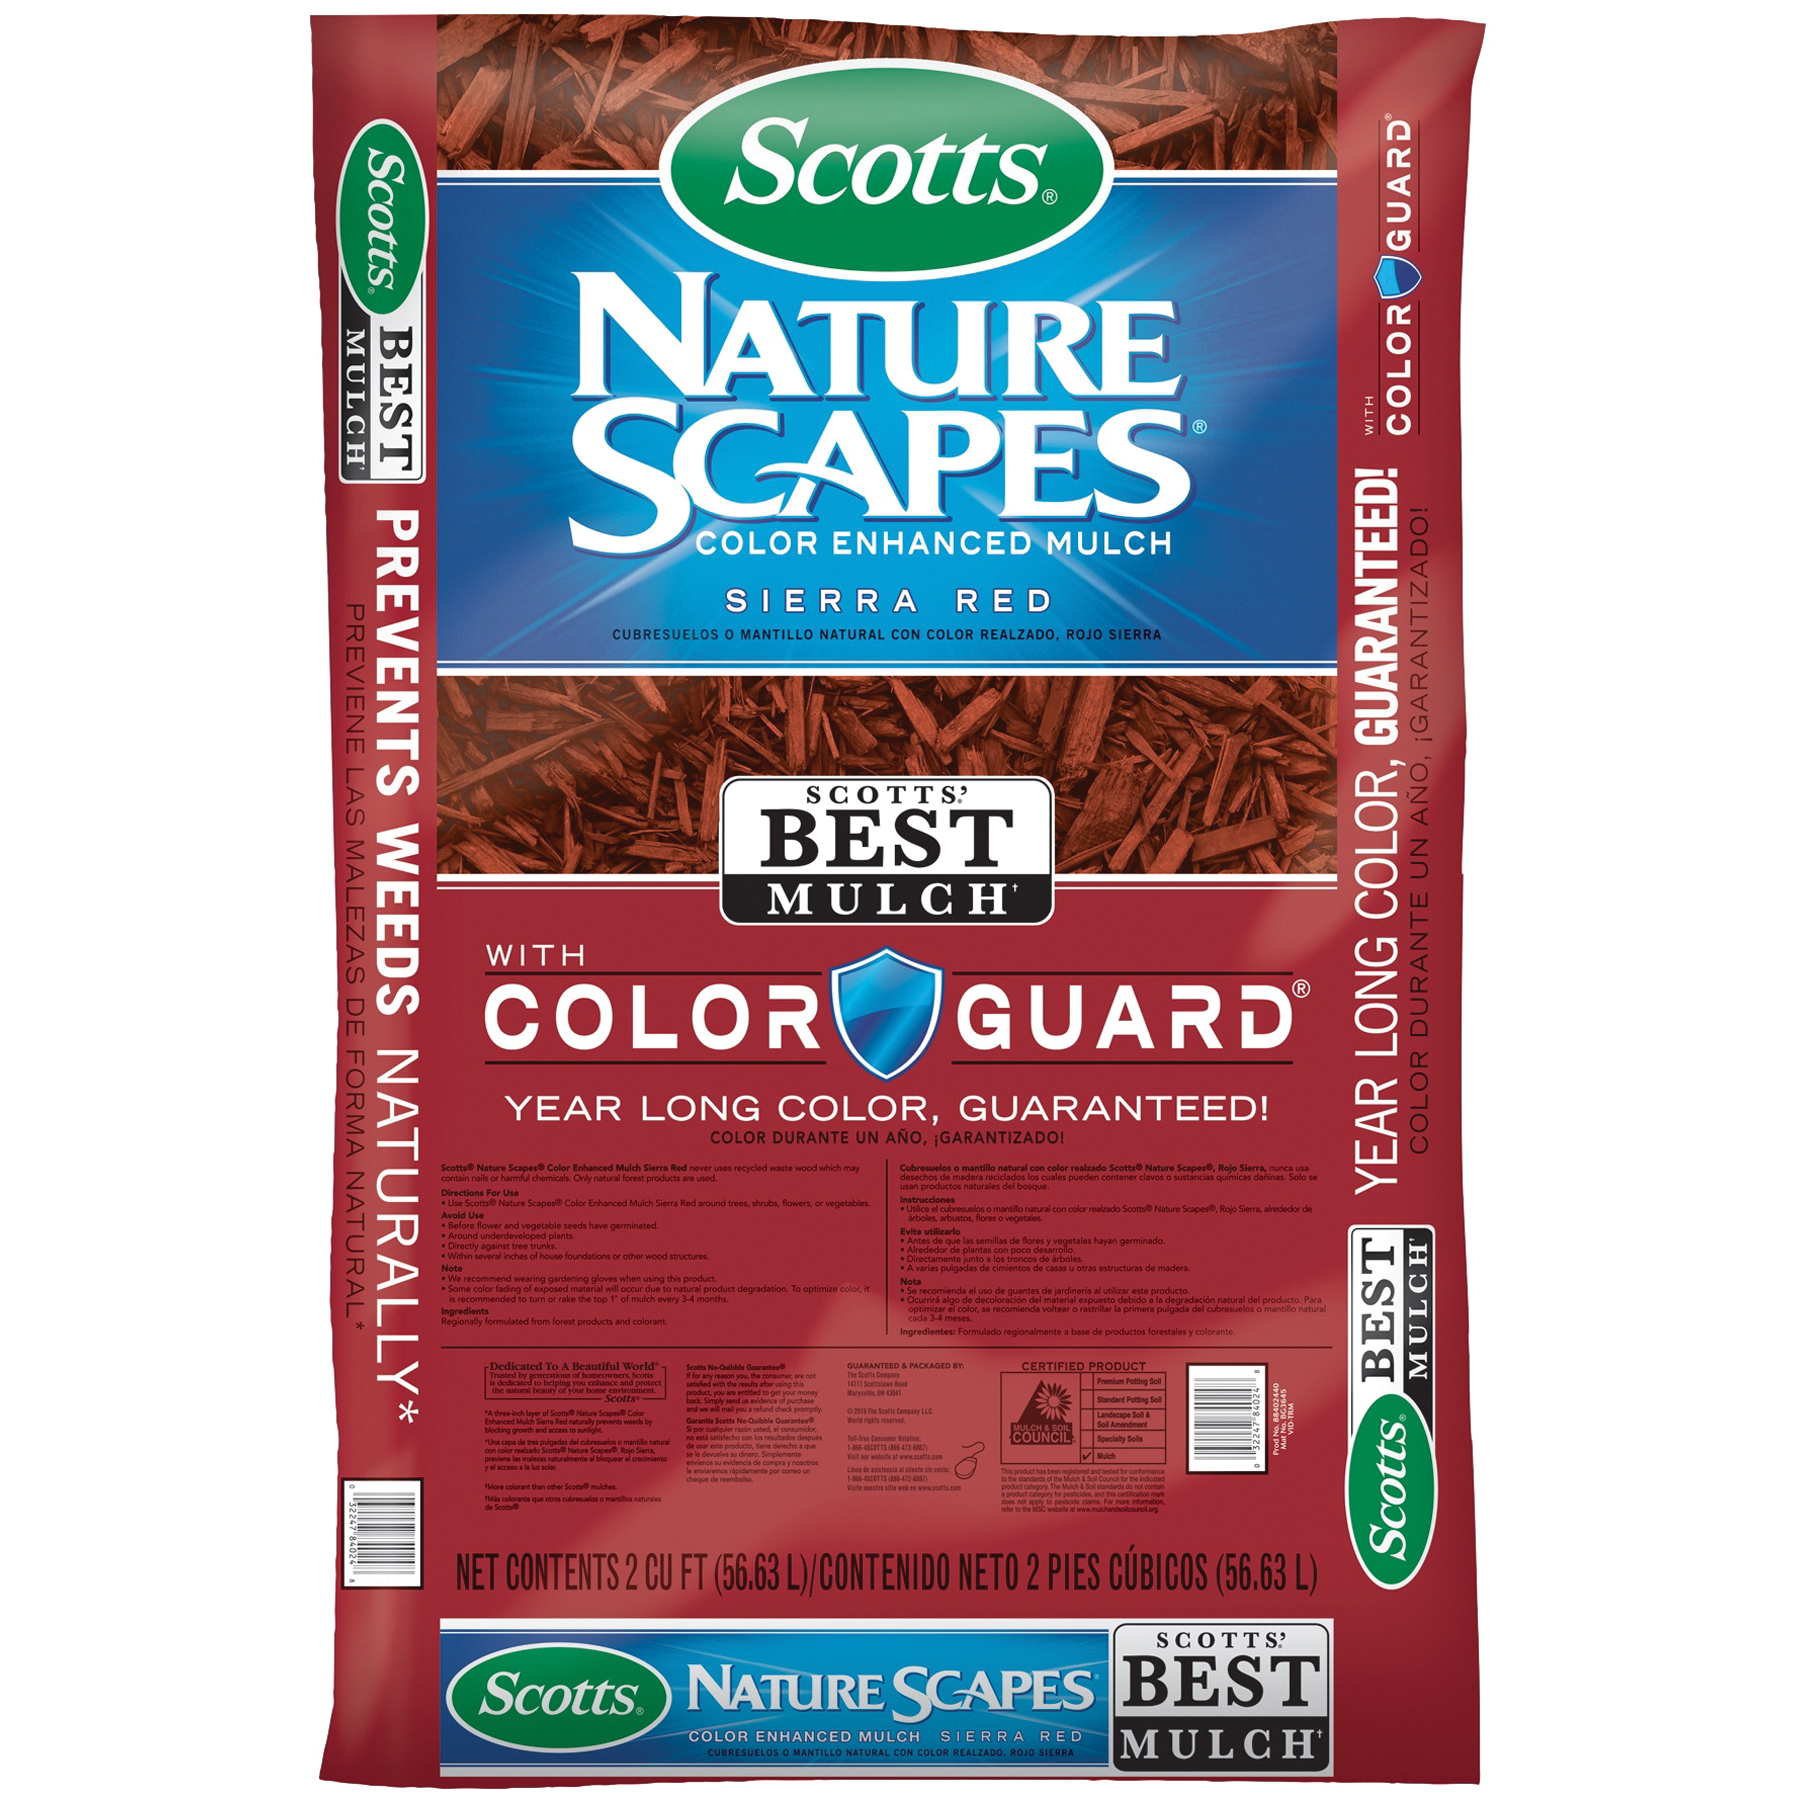 Scotts 88402440 Nature Scapes Mulch, Solid, Earthy, Red, 2 cu-ft Bag - 1